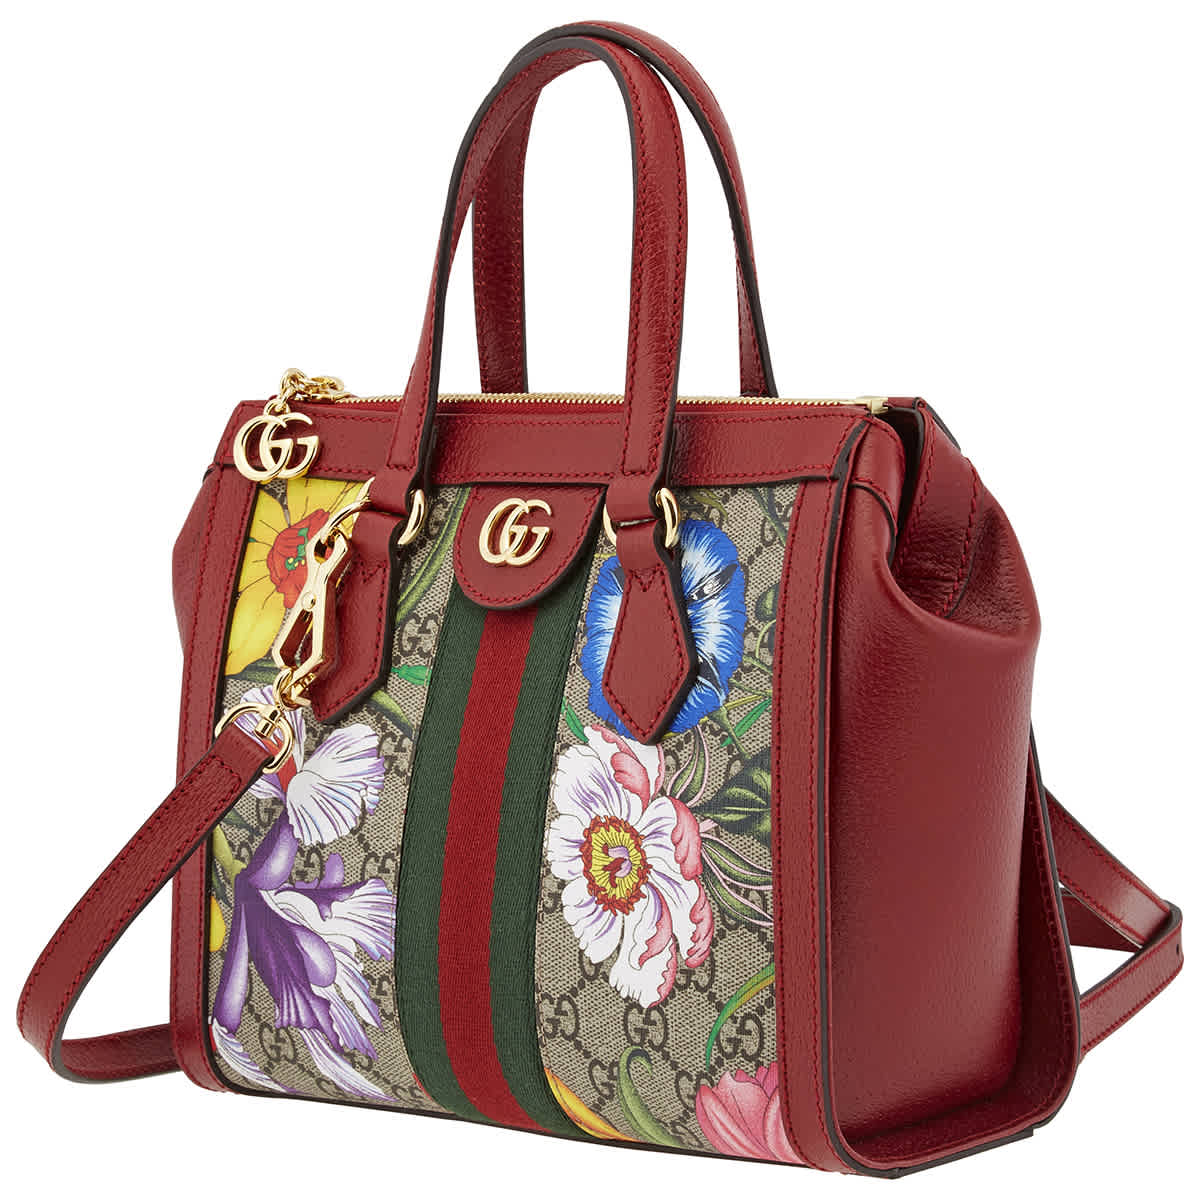  Gucci  Ladies Small  Ophidia  GG  Flora Tote  Bag  547551 HV8AC 